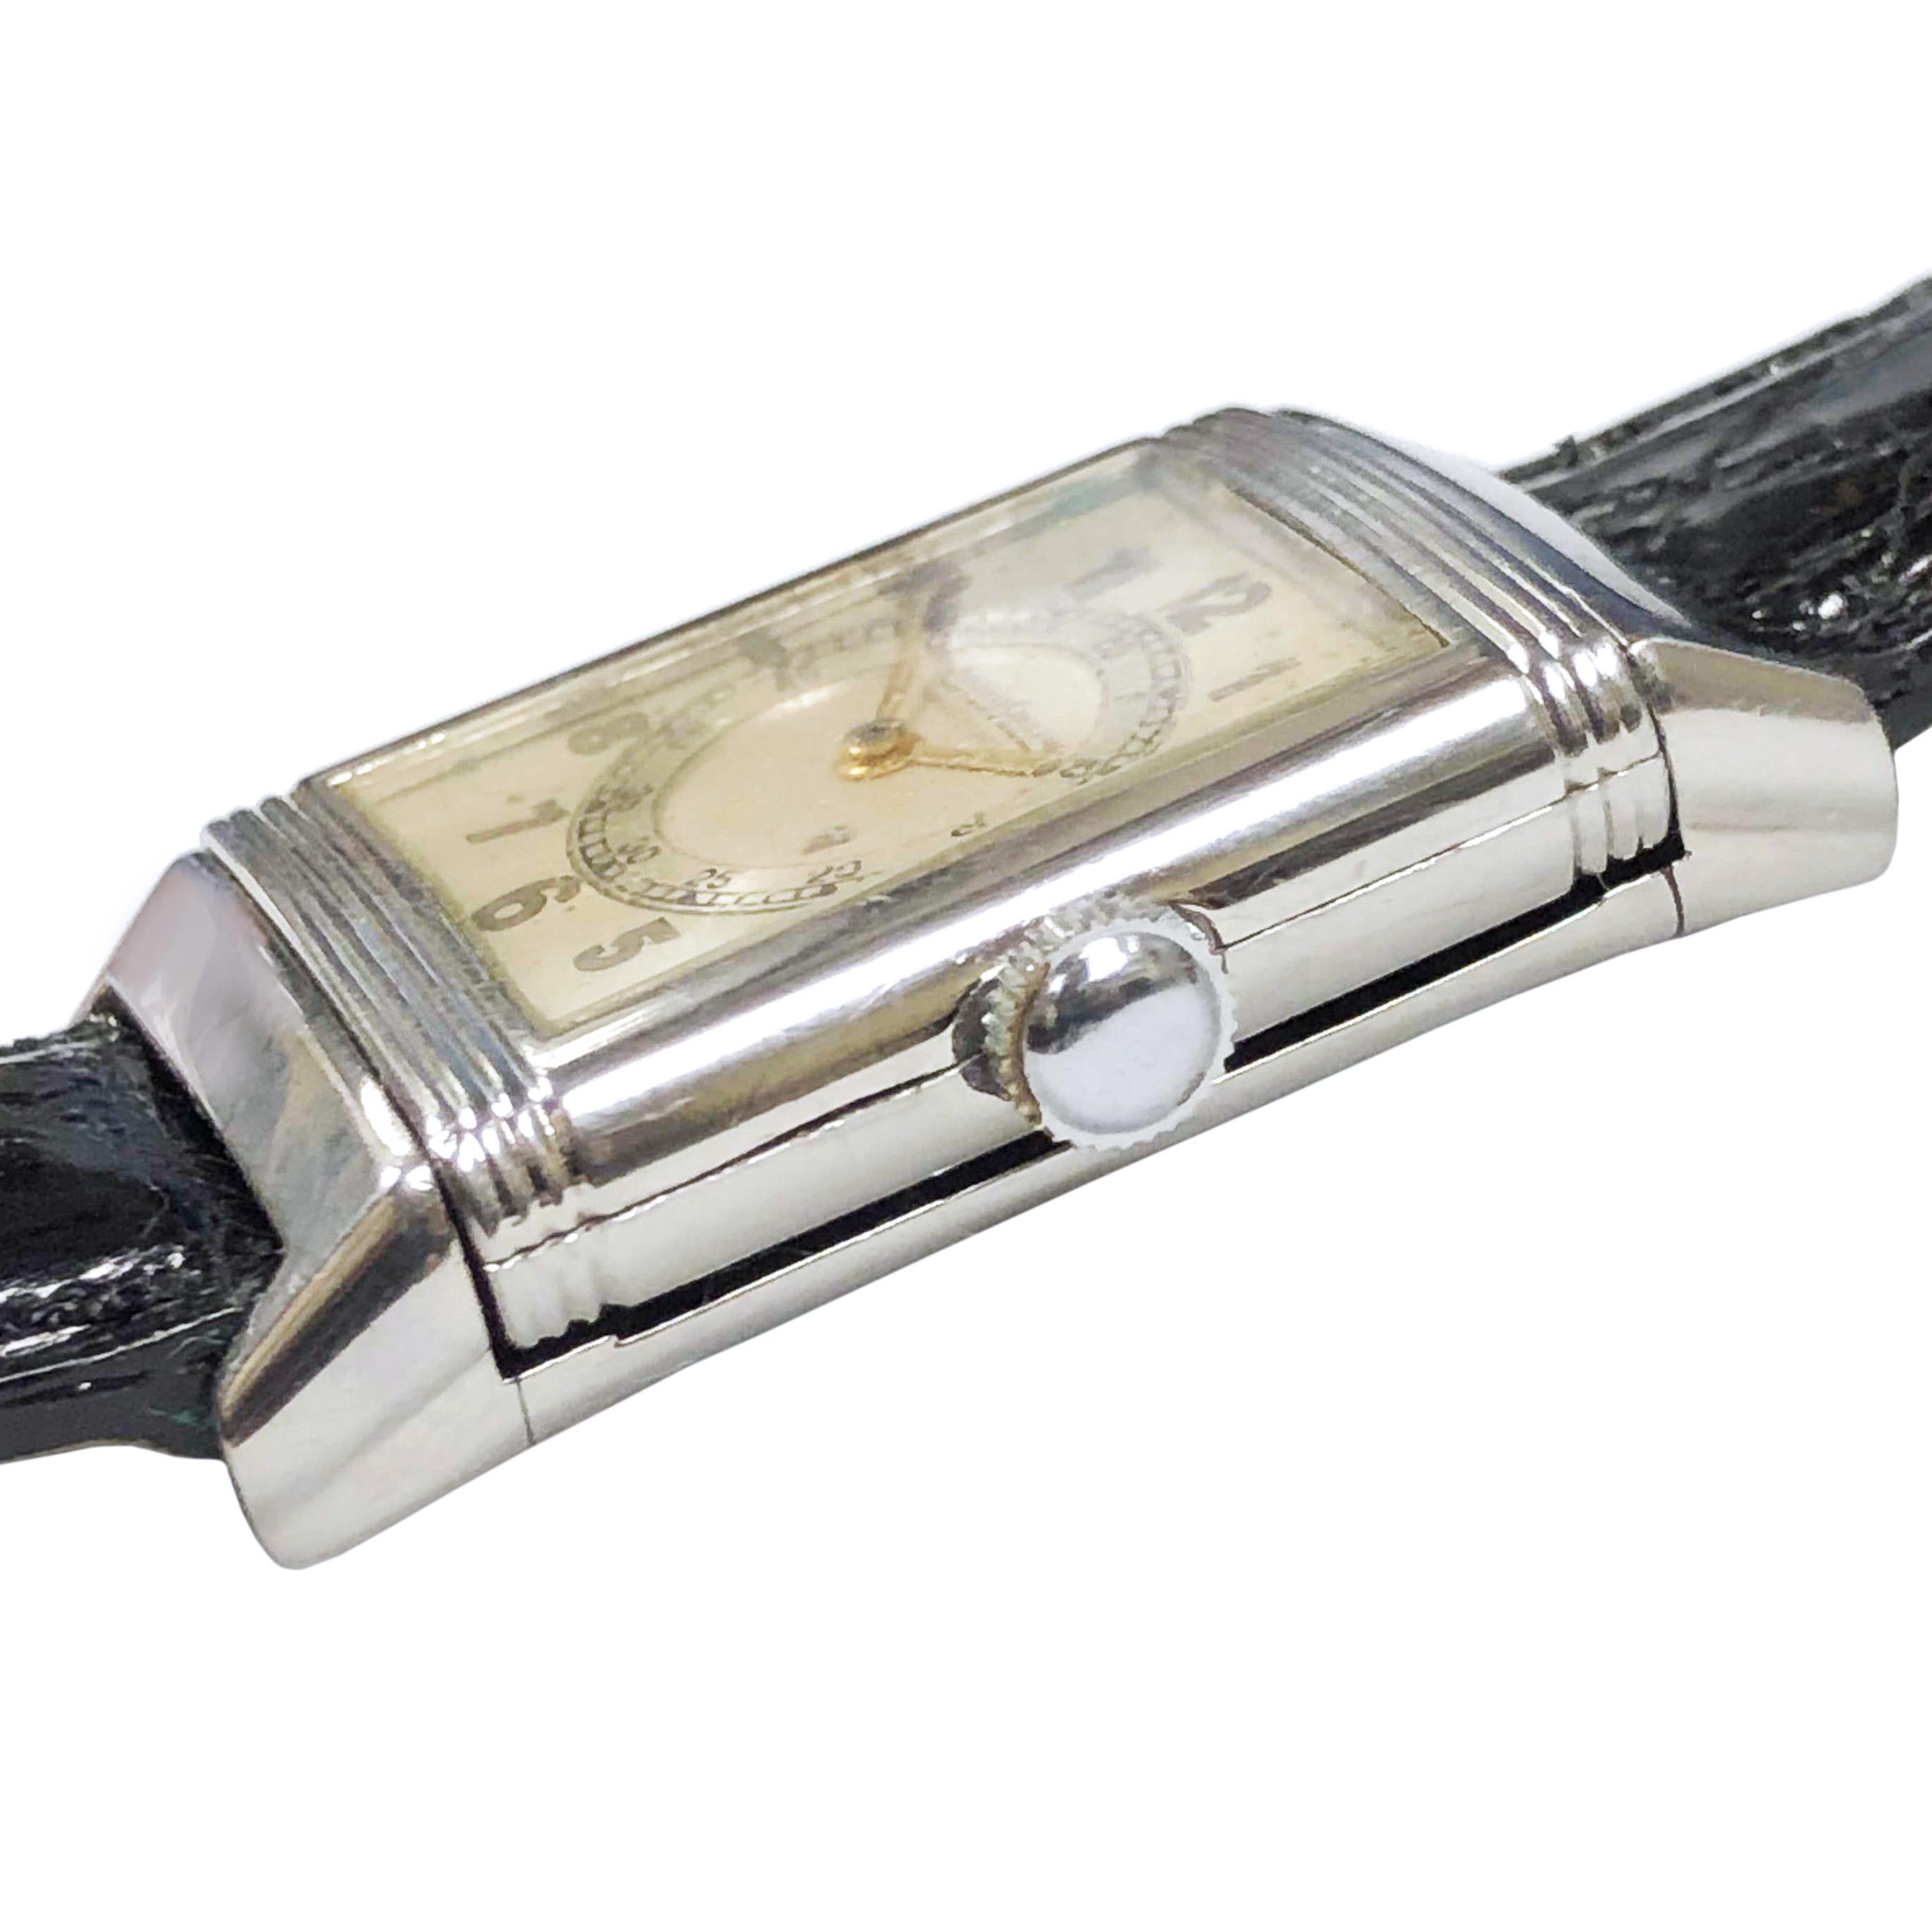 Circa 1930s Jaeger LeCoultre Reverso Wrist watch, 37 X 23 MM Stainless Steel Case that has never been engraved. 15 Jewel Mechanical, Manual wind movement. Original silvered dial with Luminous numbers and original Gold Hands. Black lizard Strap. A